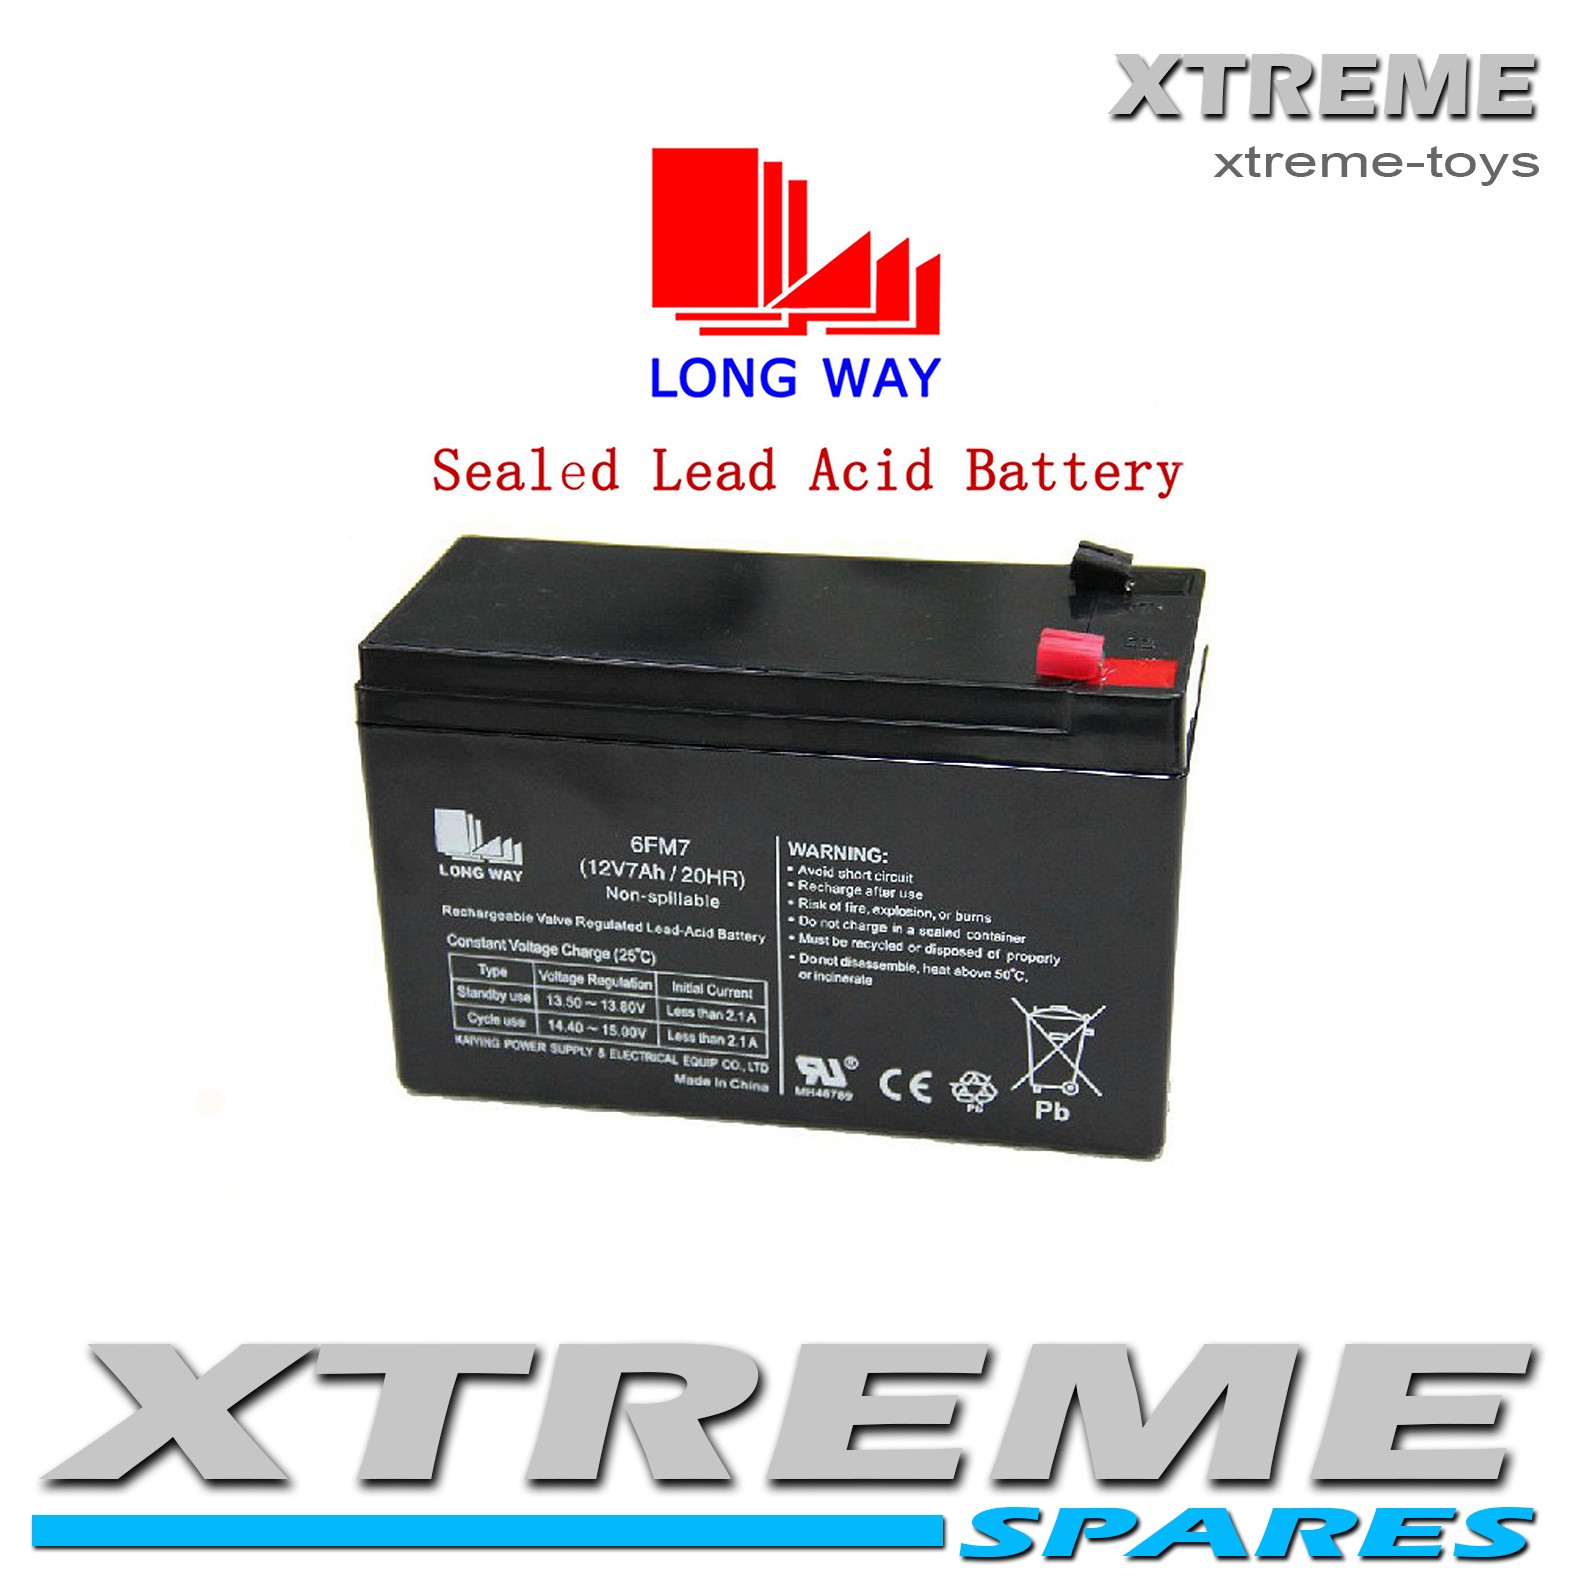 SEALED LEAD ACID RECHARGEABLE BATTERY 12V 7AH CHILDREN'S TOY RIDE ON VEHICLES